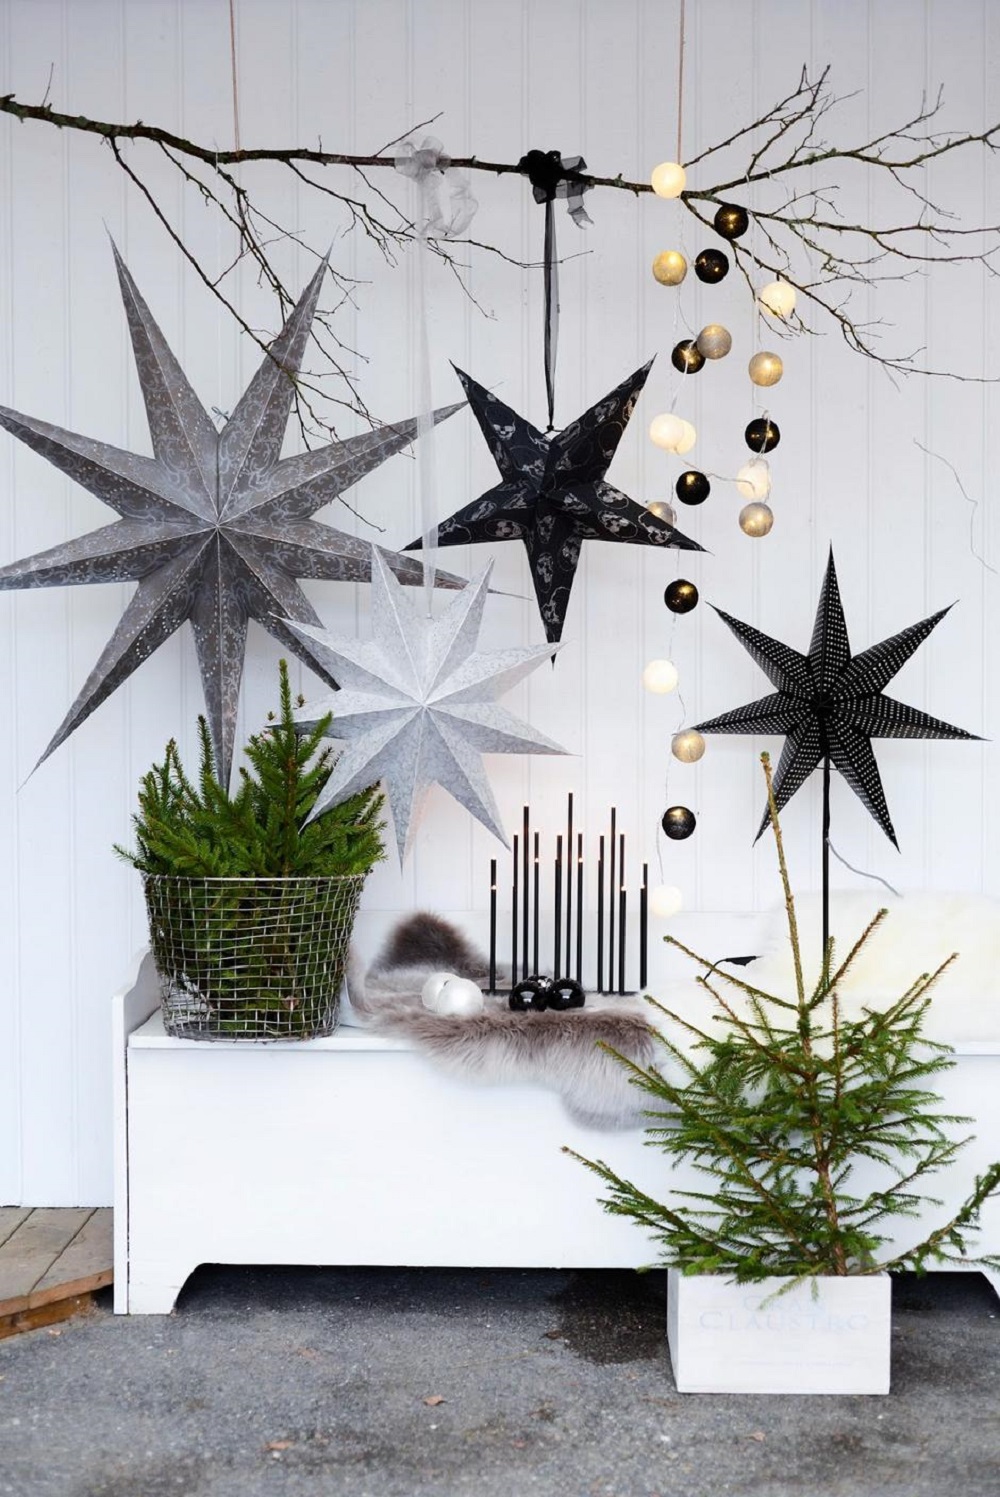 t4 Modern Christmas decoration ideas that are heartwarming